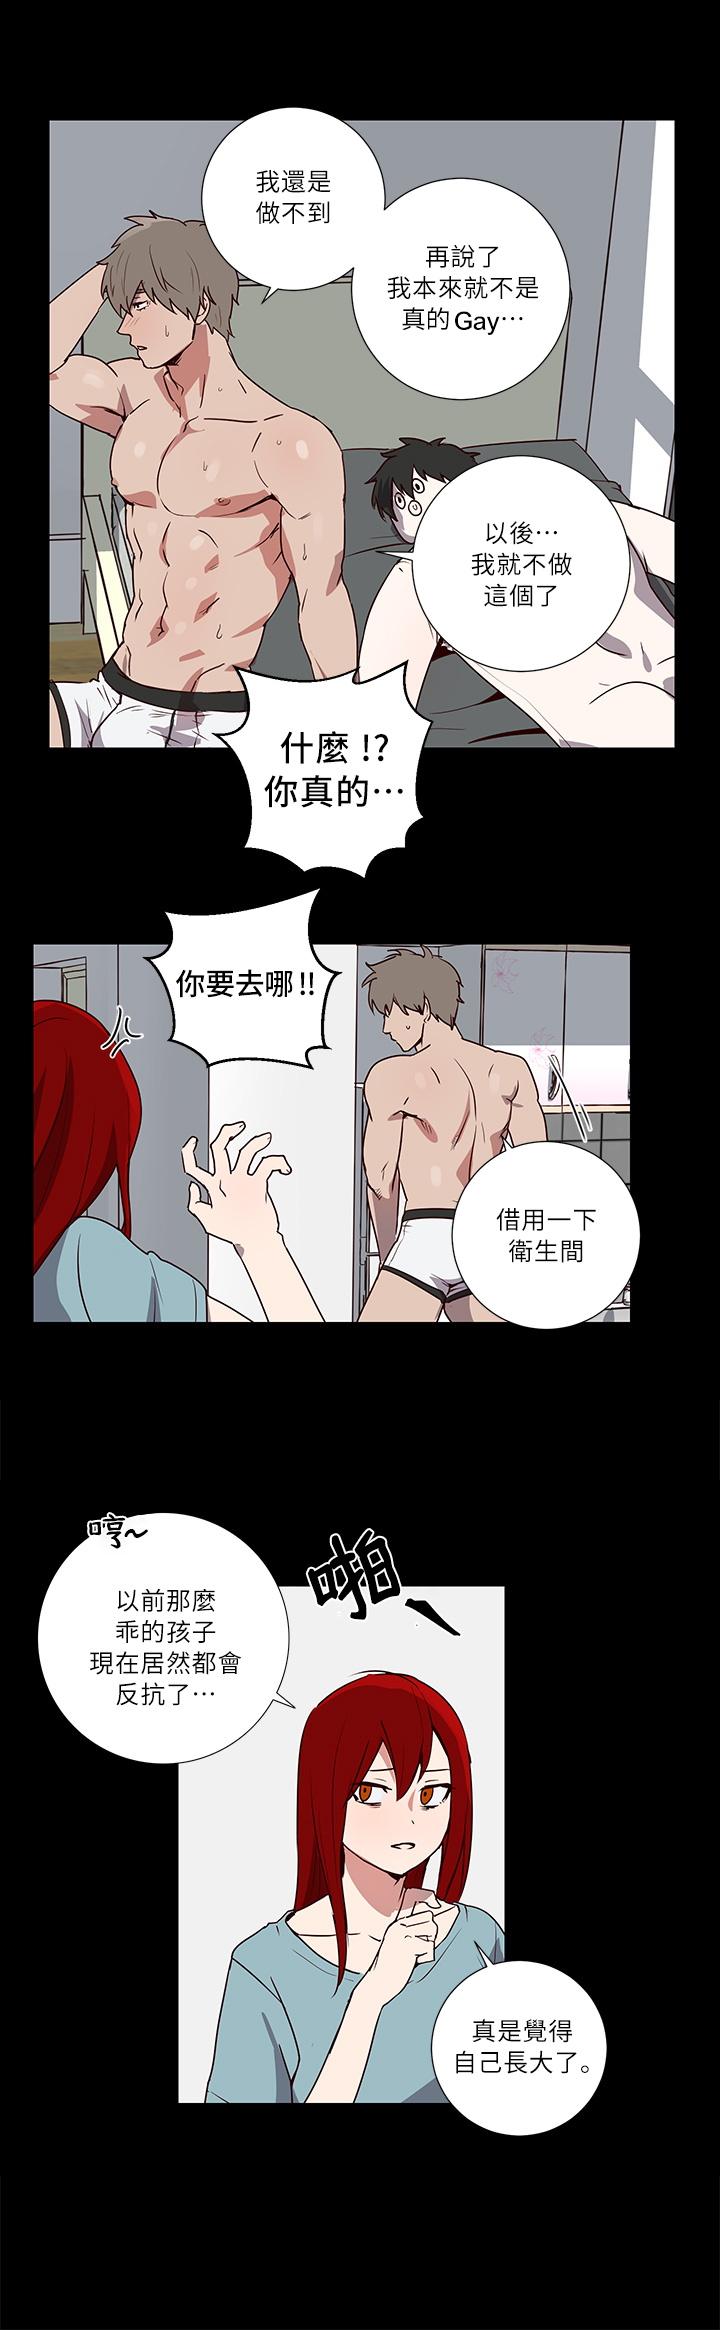 Hotwife 莫捡肥皂 01 Chinese Gay Emo - Page 11